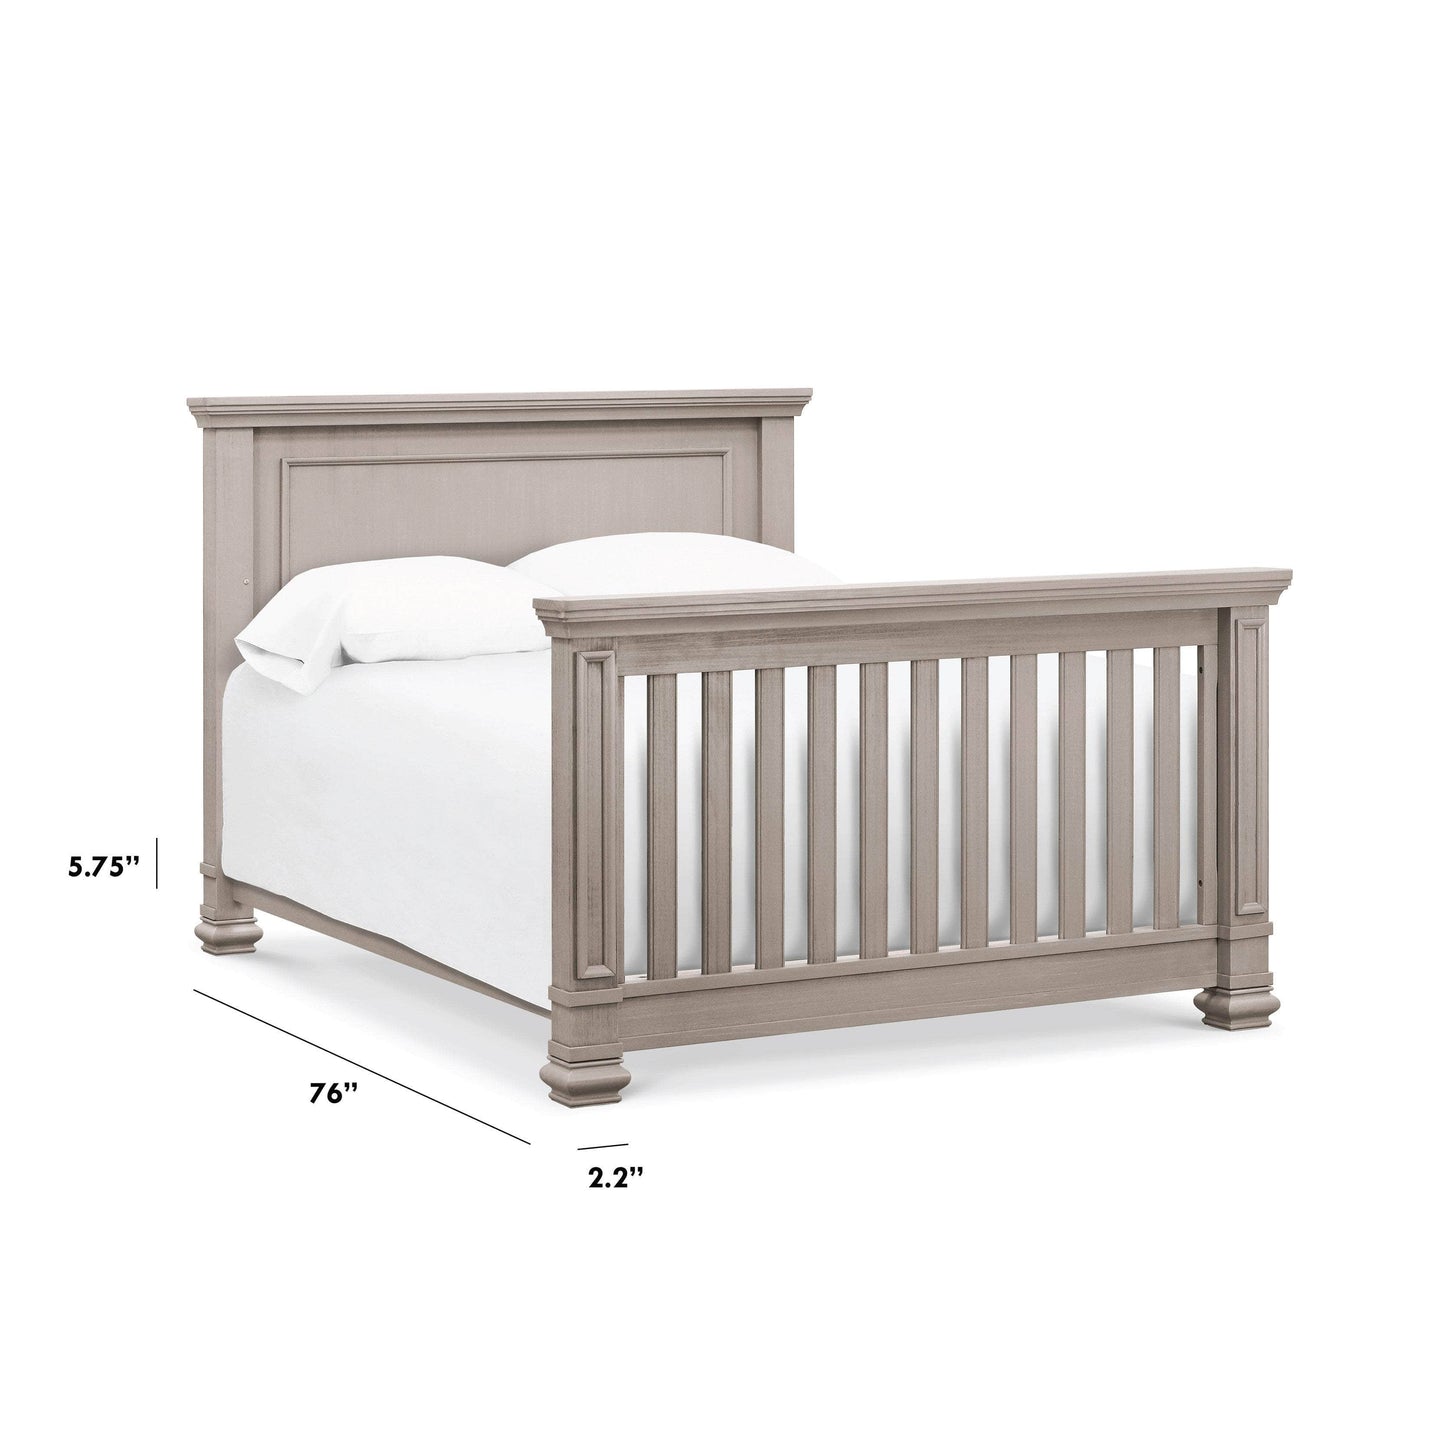 M7689MST,Full Size Bed Conversion Kit in Moonstone